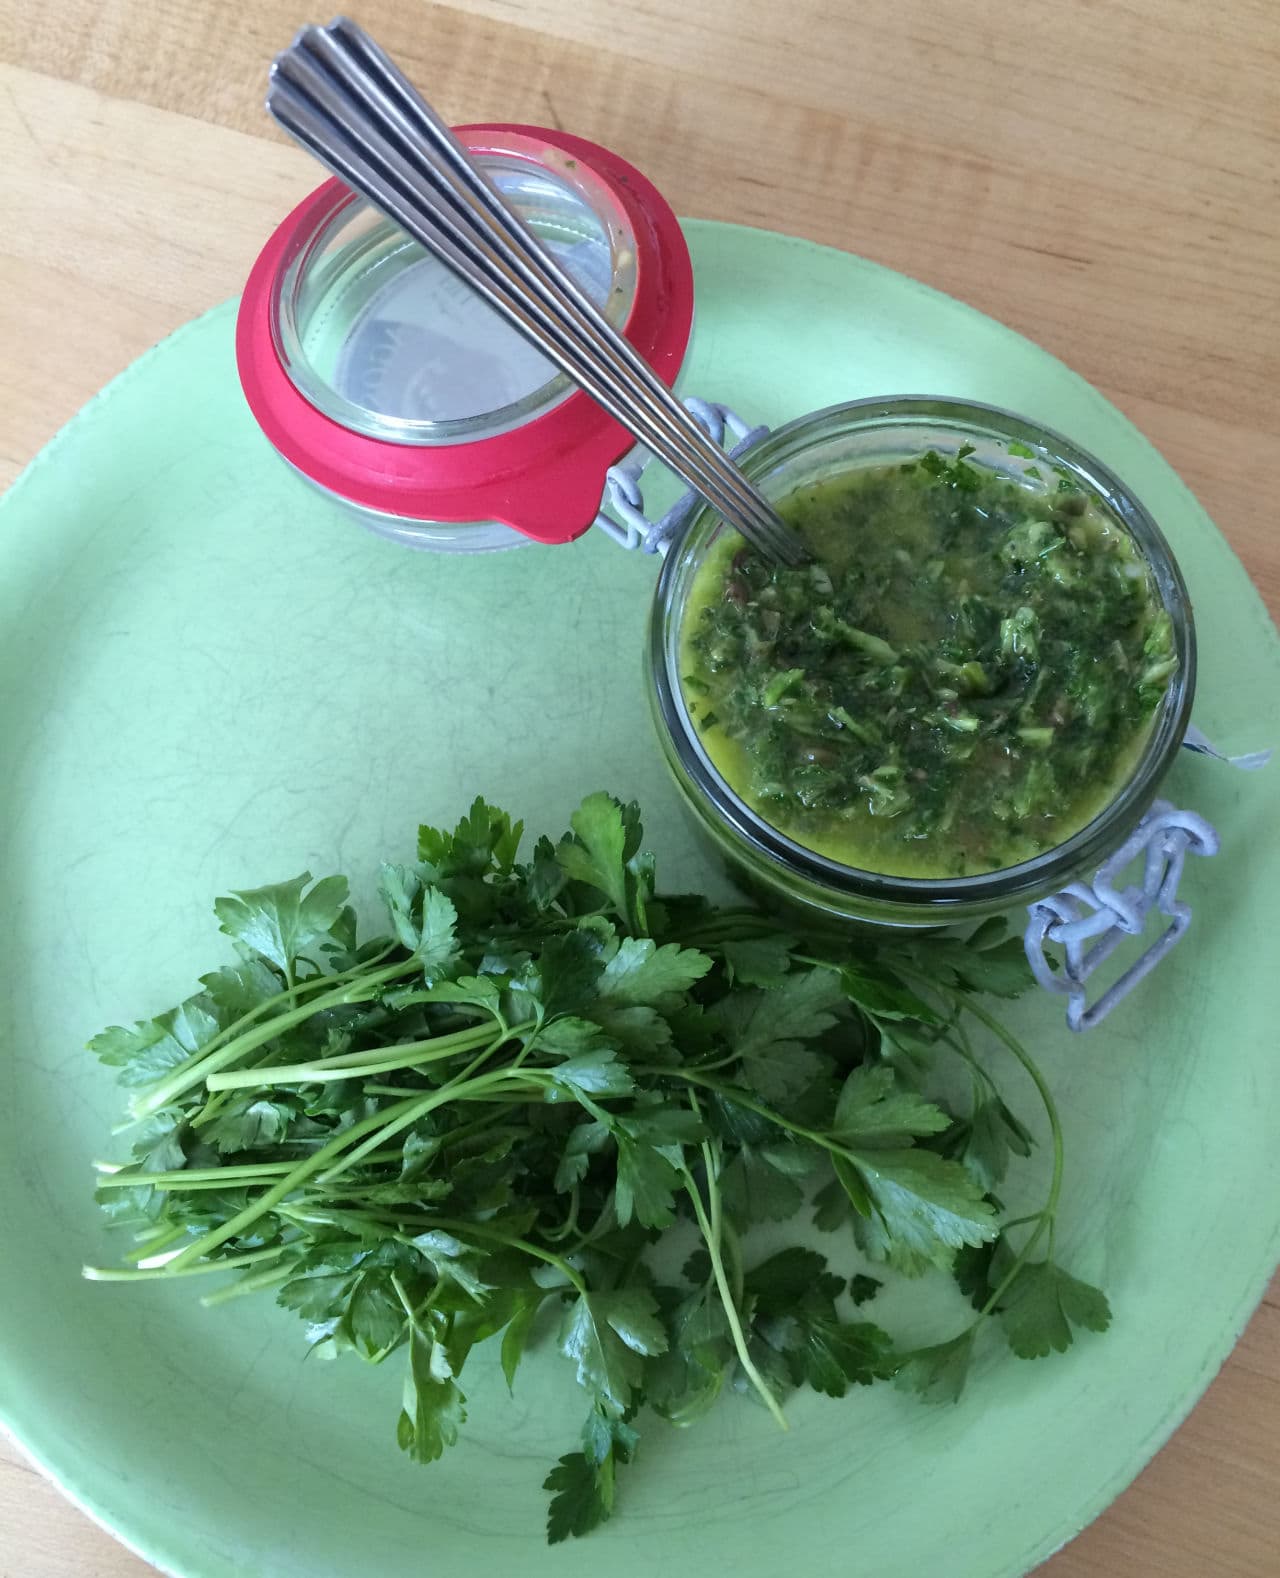 Kathy Gunst's chimichurri can be served with grilled vegetables or fish, or used as a marinade. (Kathy Gunst)